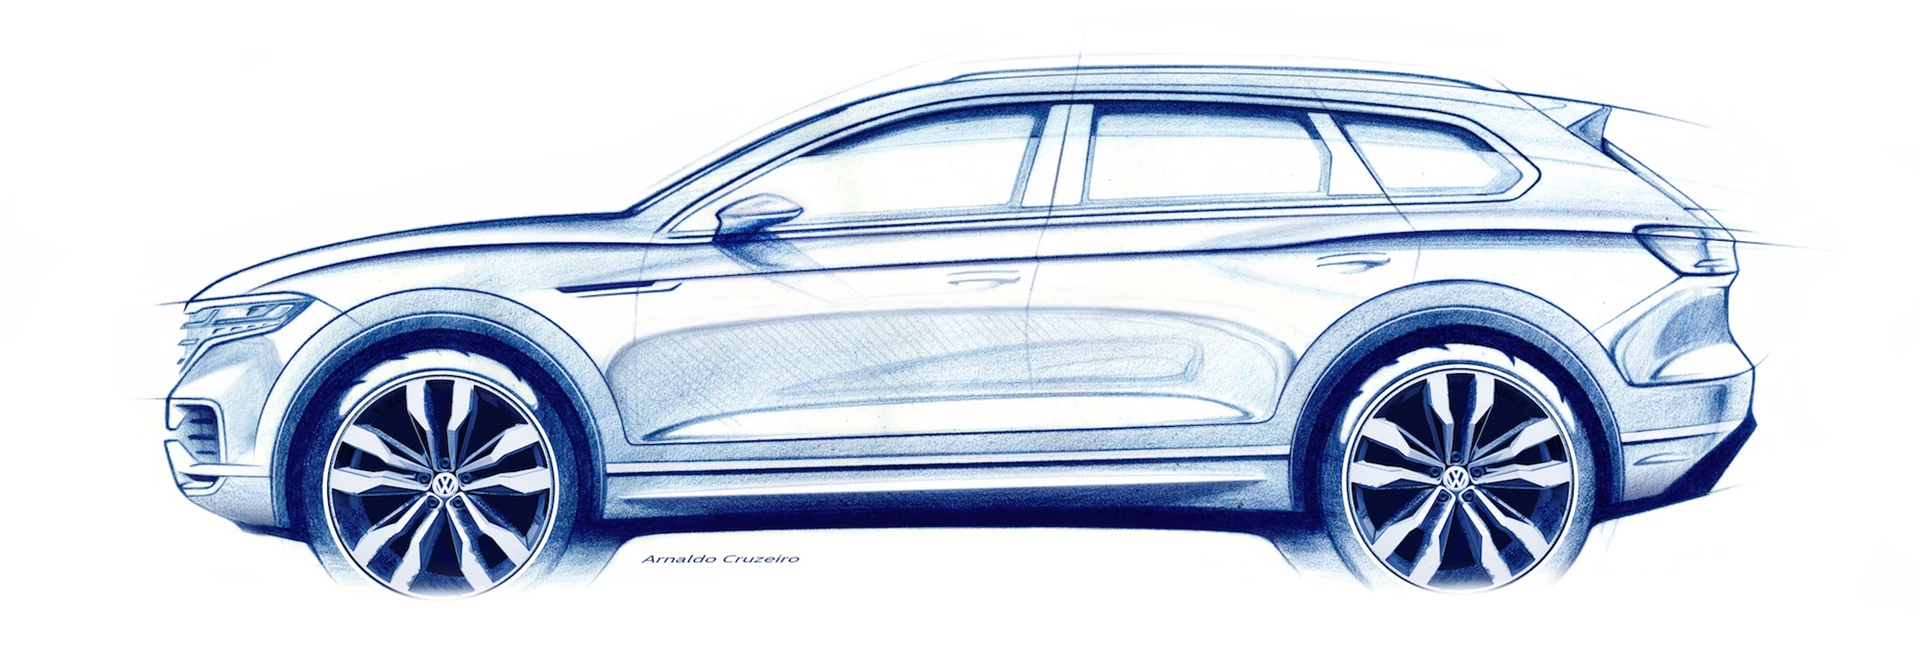 Volkswagen gives first look of new Touareg